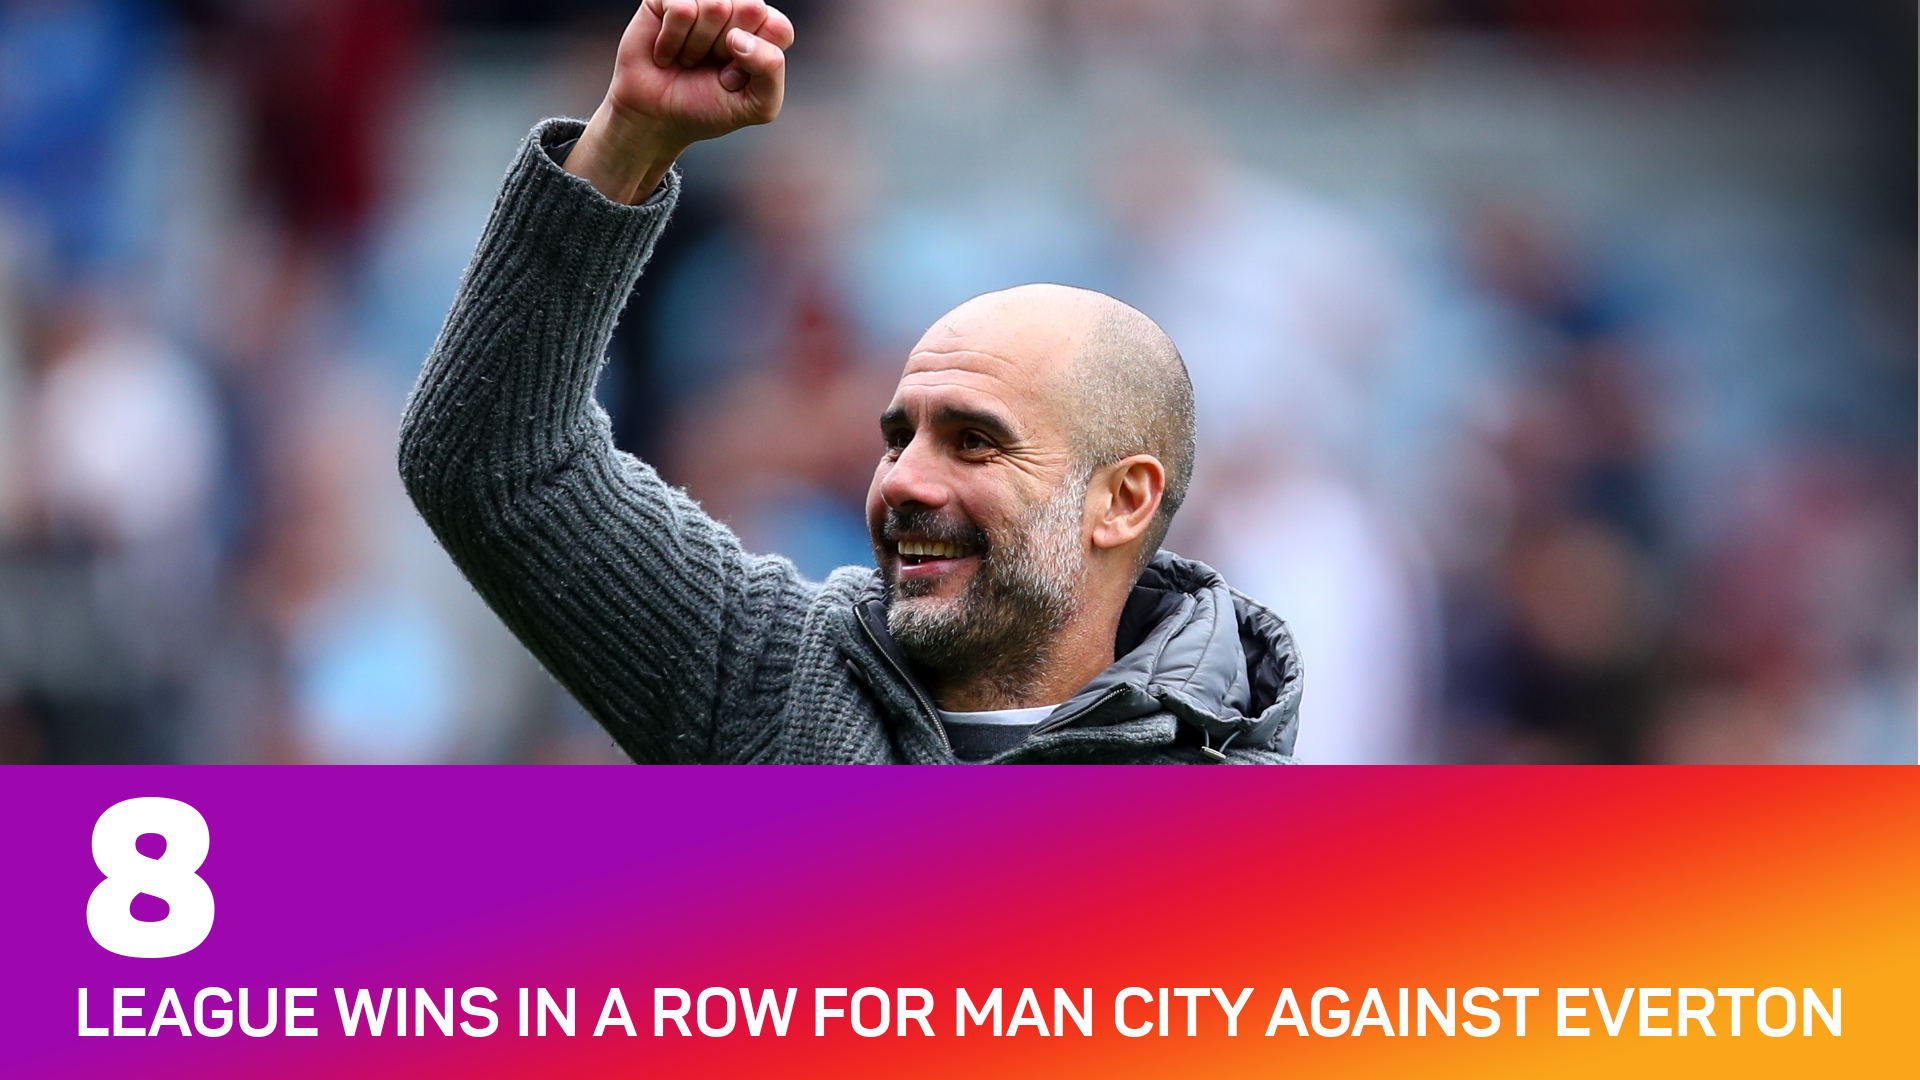 Man City have won eight in a row against Everton